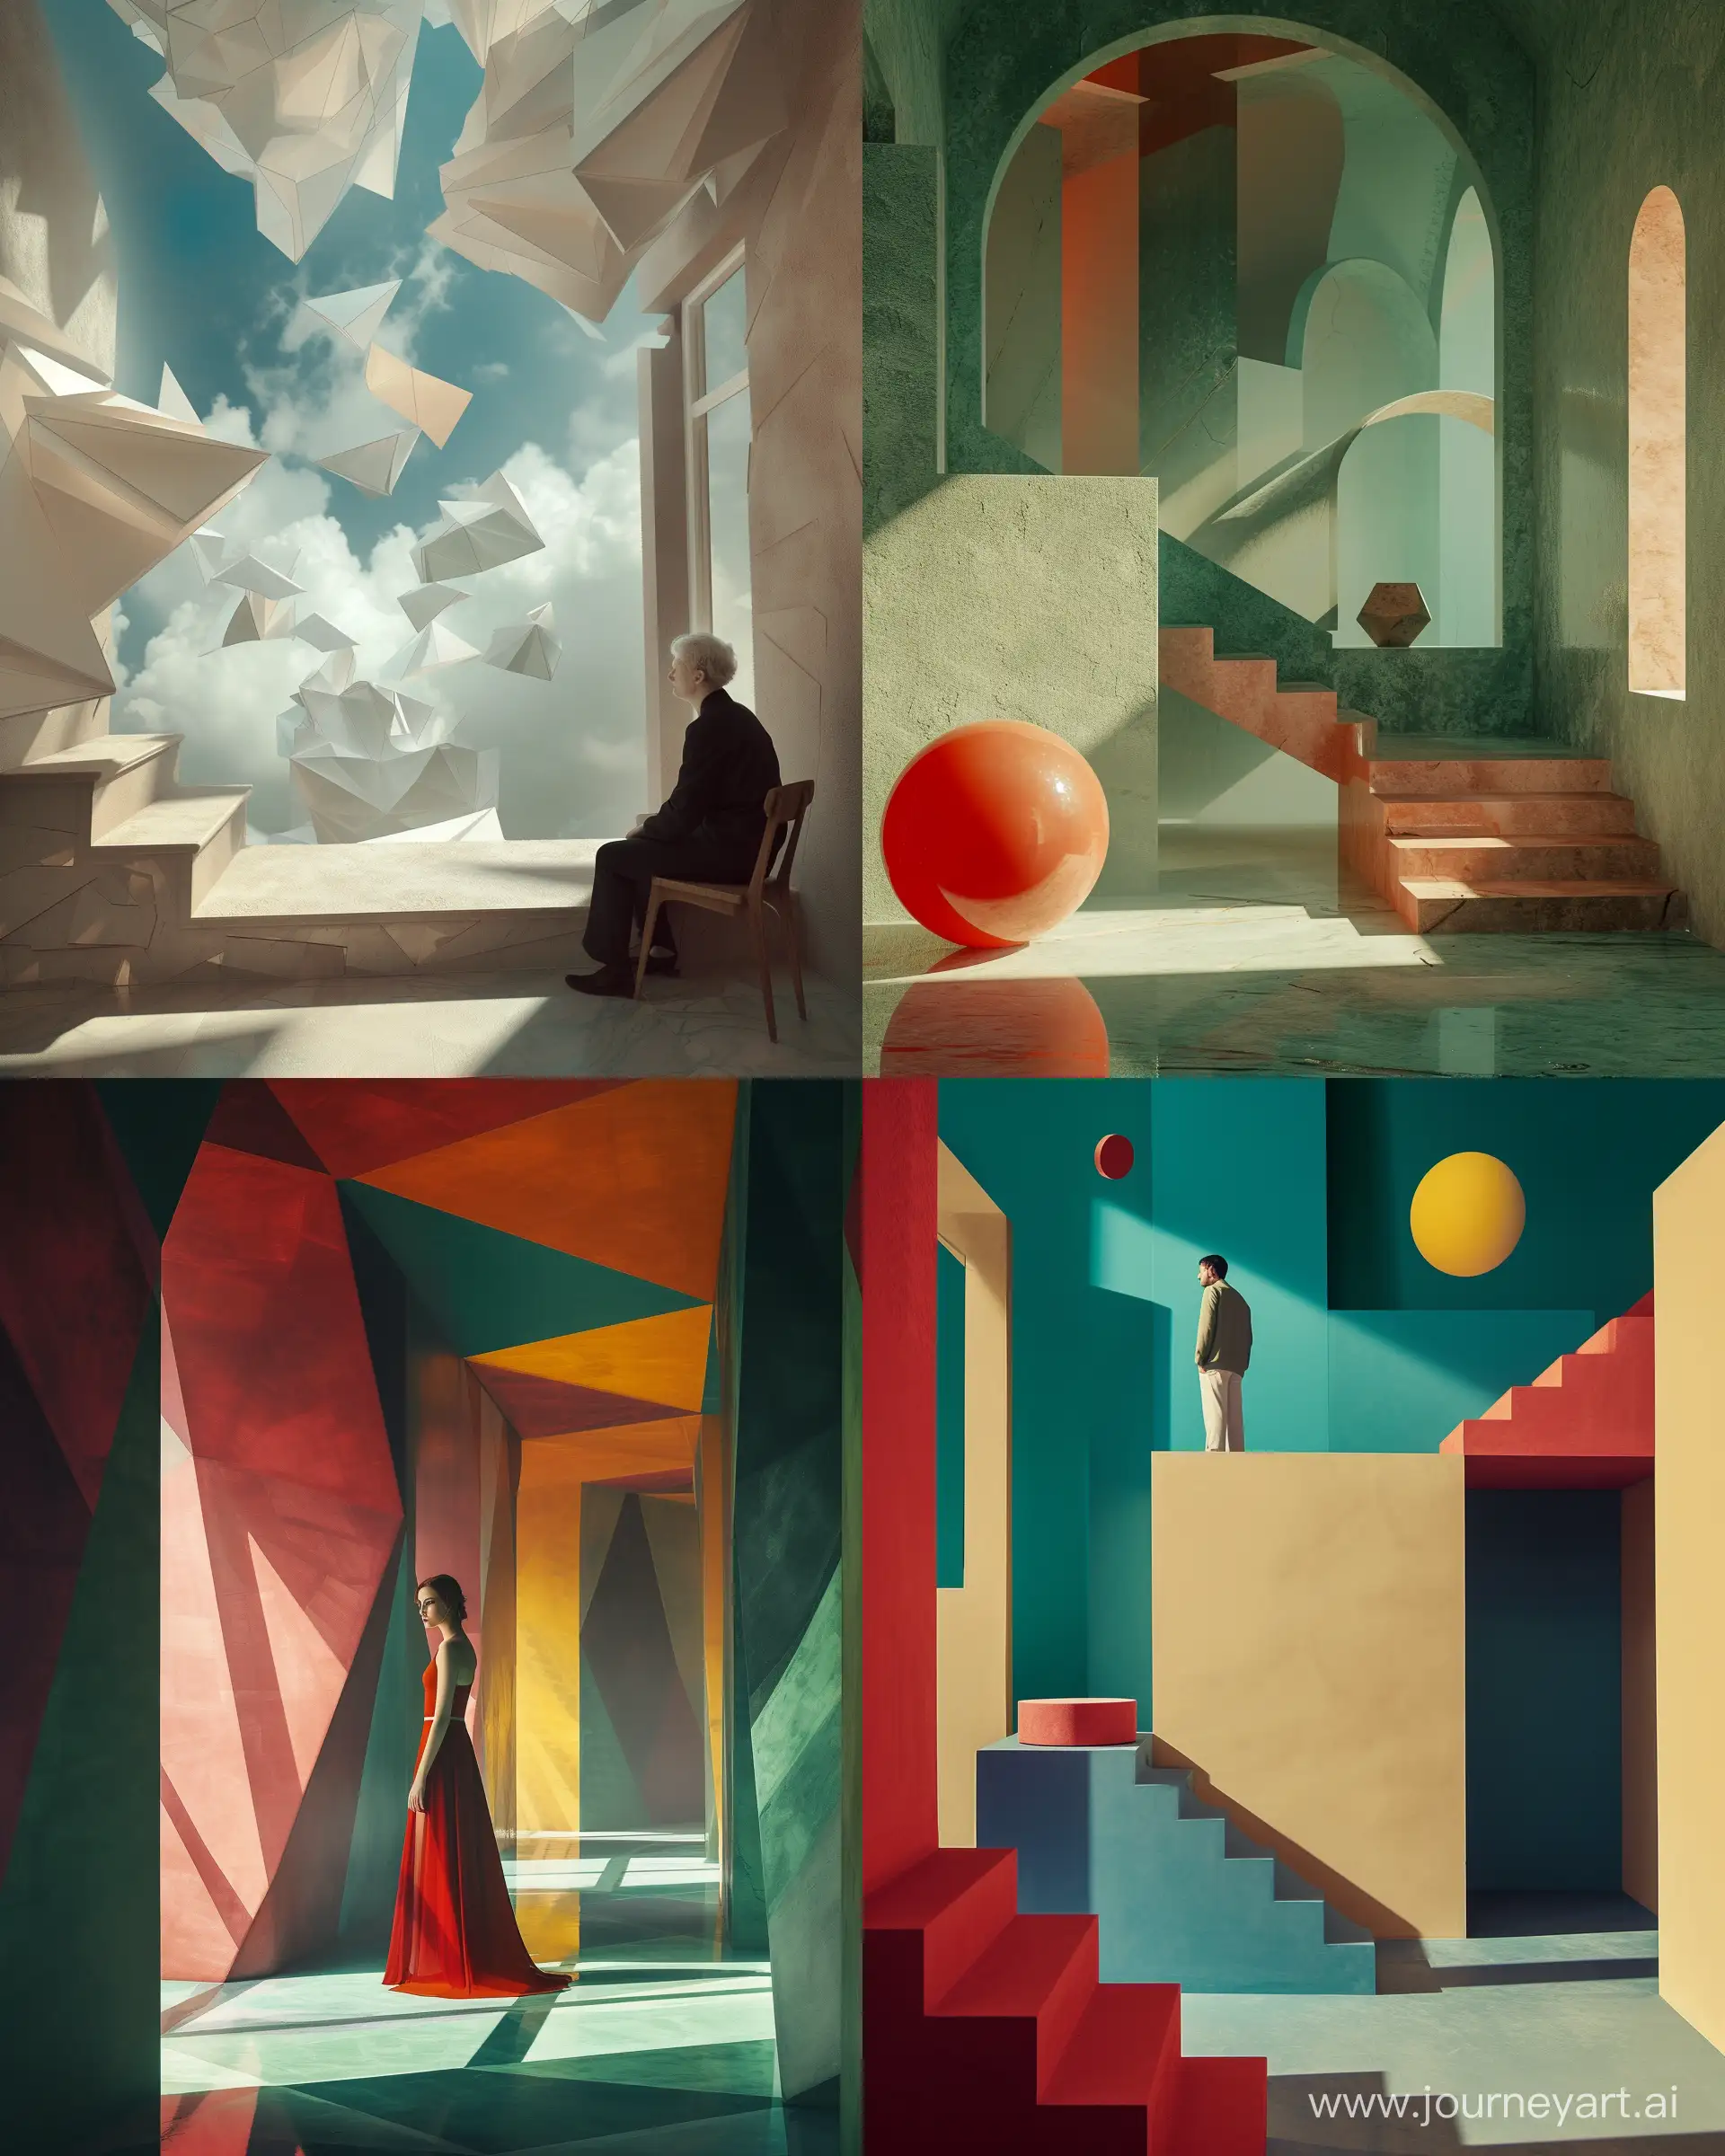 Surrealistic-Geometric-Atmosphere-in-Magical-Picasso-Style